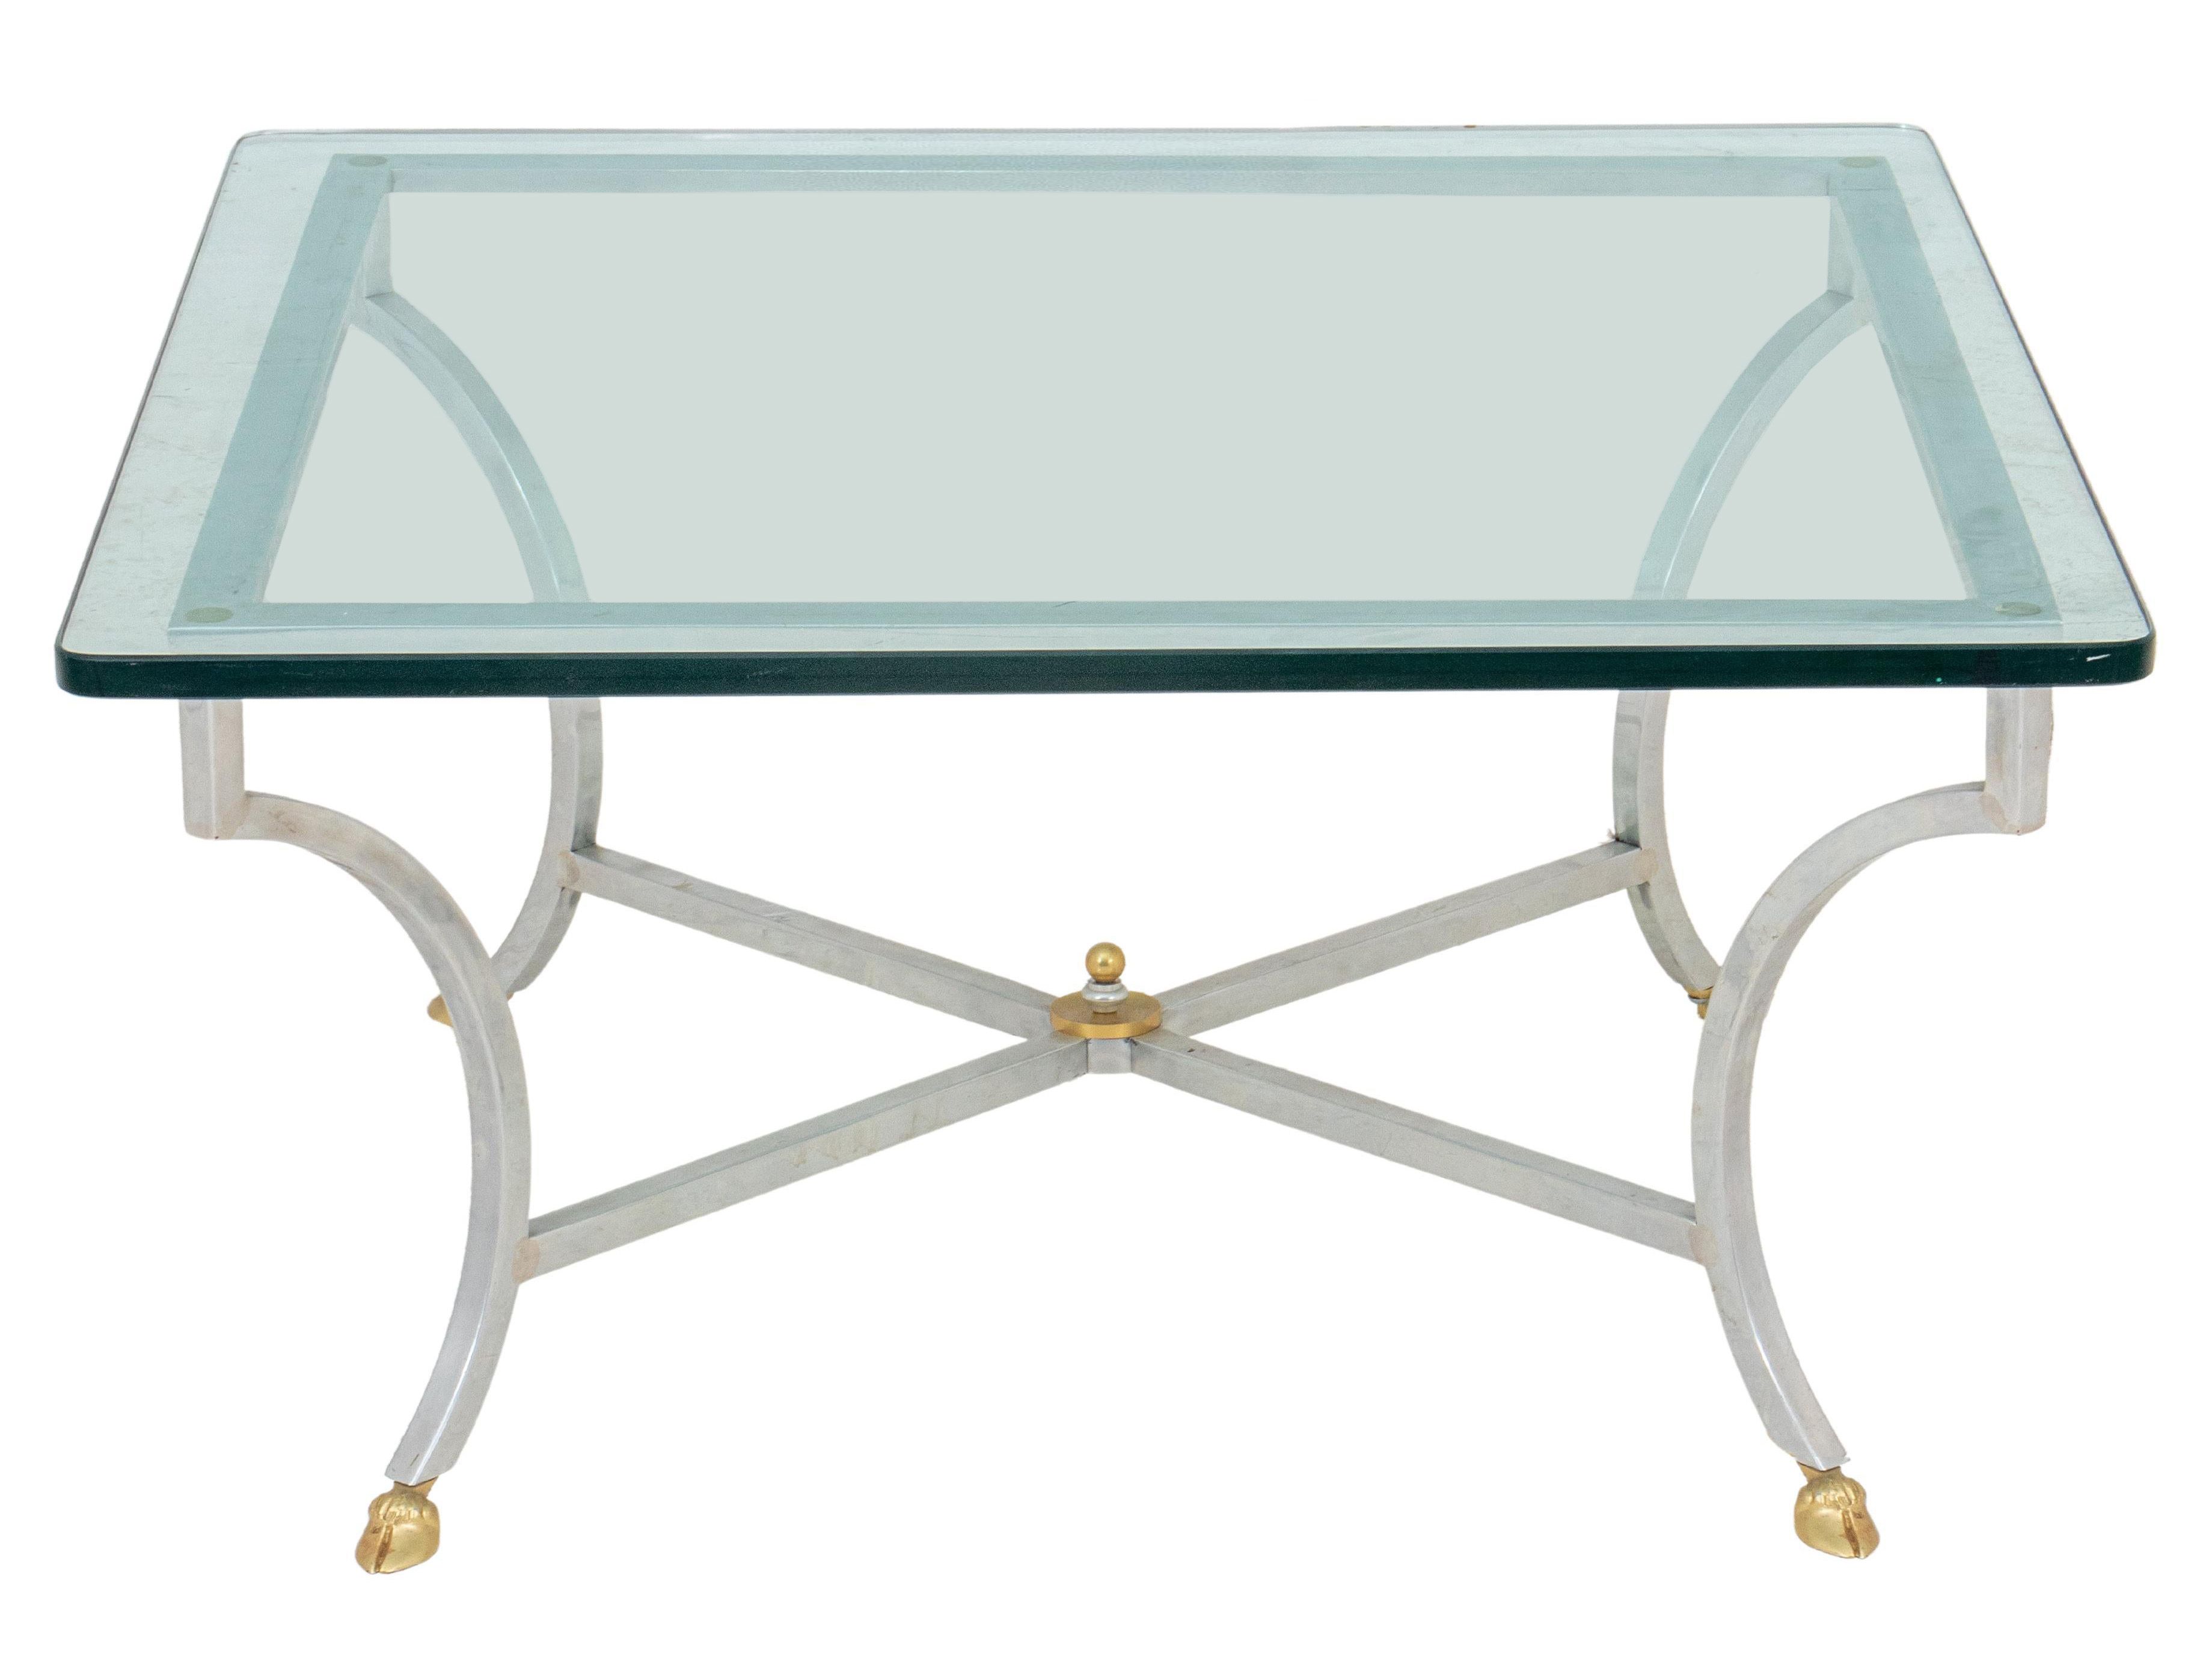 NEOCLASSICAL COFFEE TABLE WITH 30c490